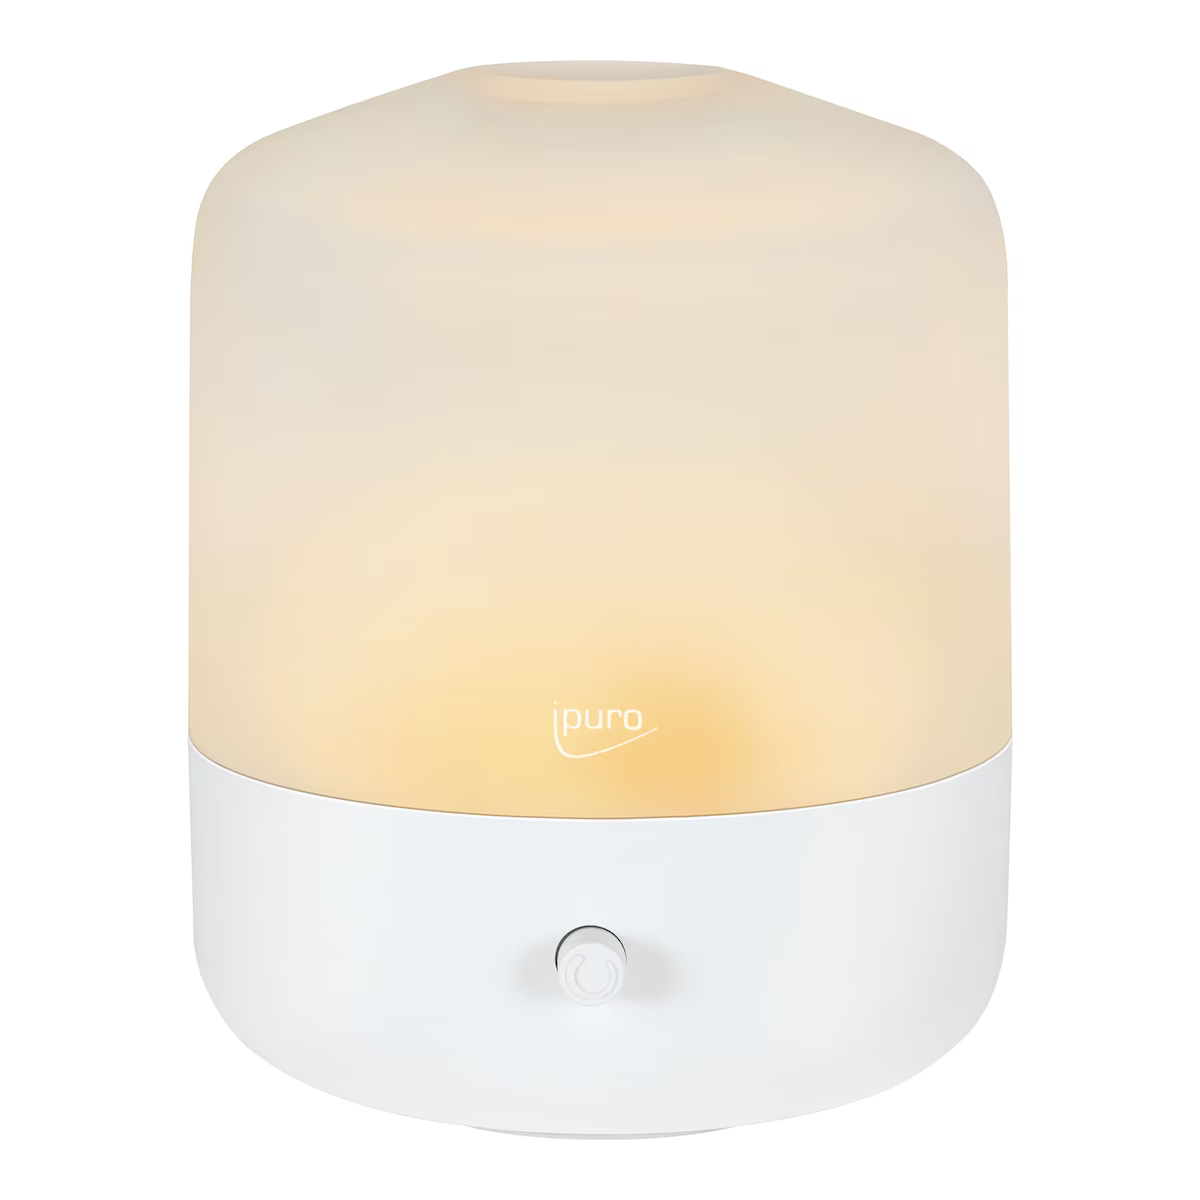 ipuro Air Sonic Aroma Diffusor, Mood white - Buy online now